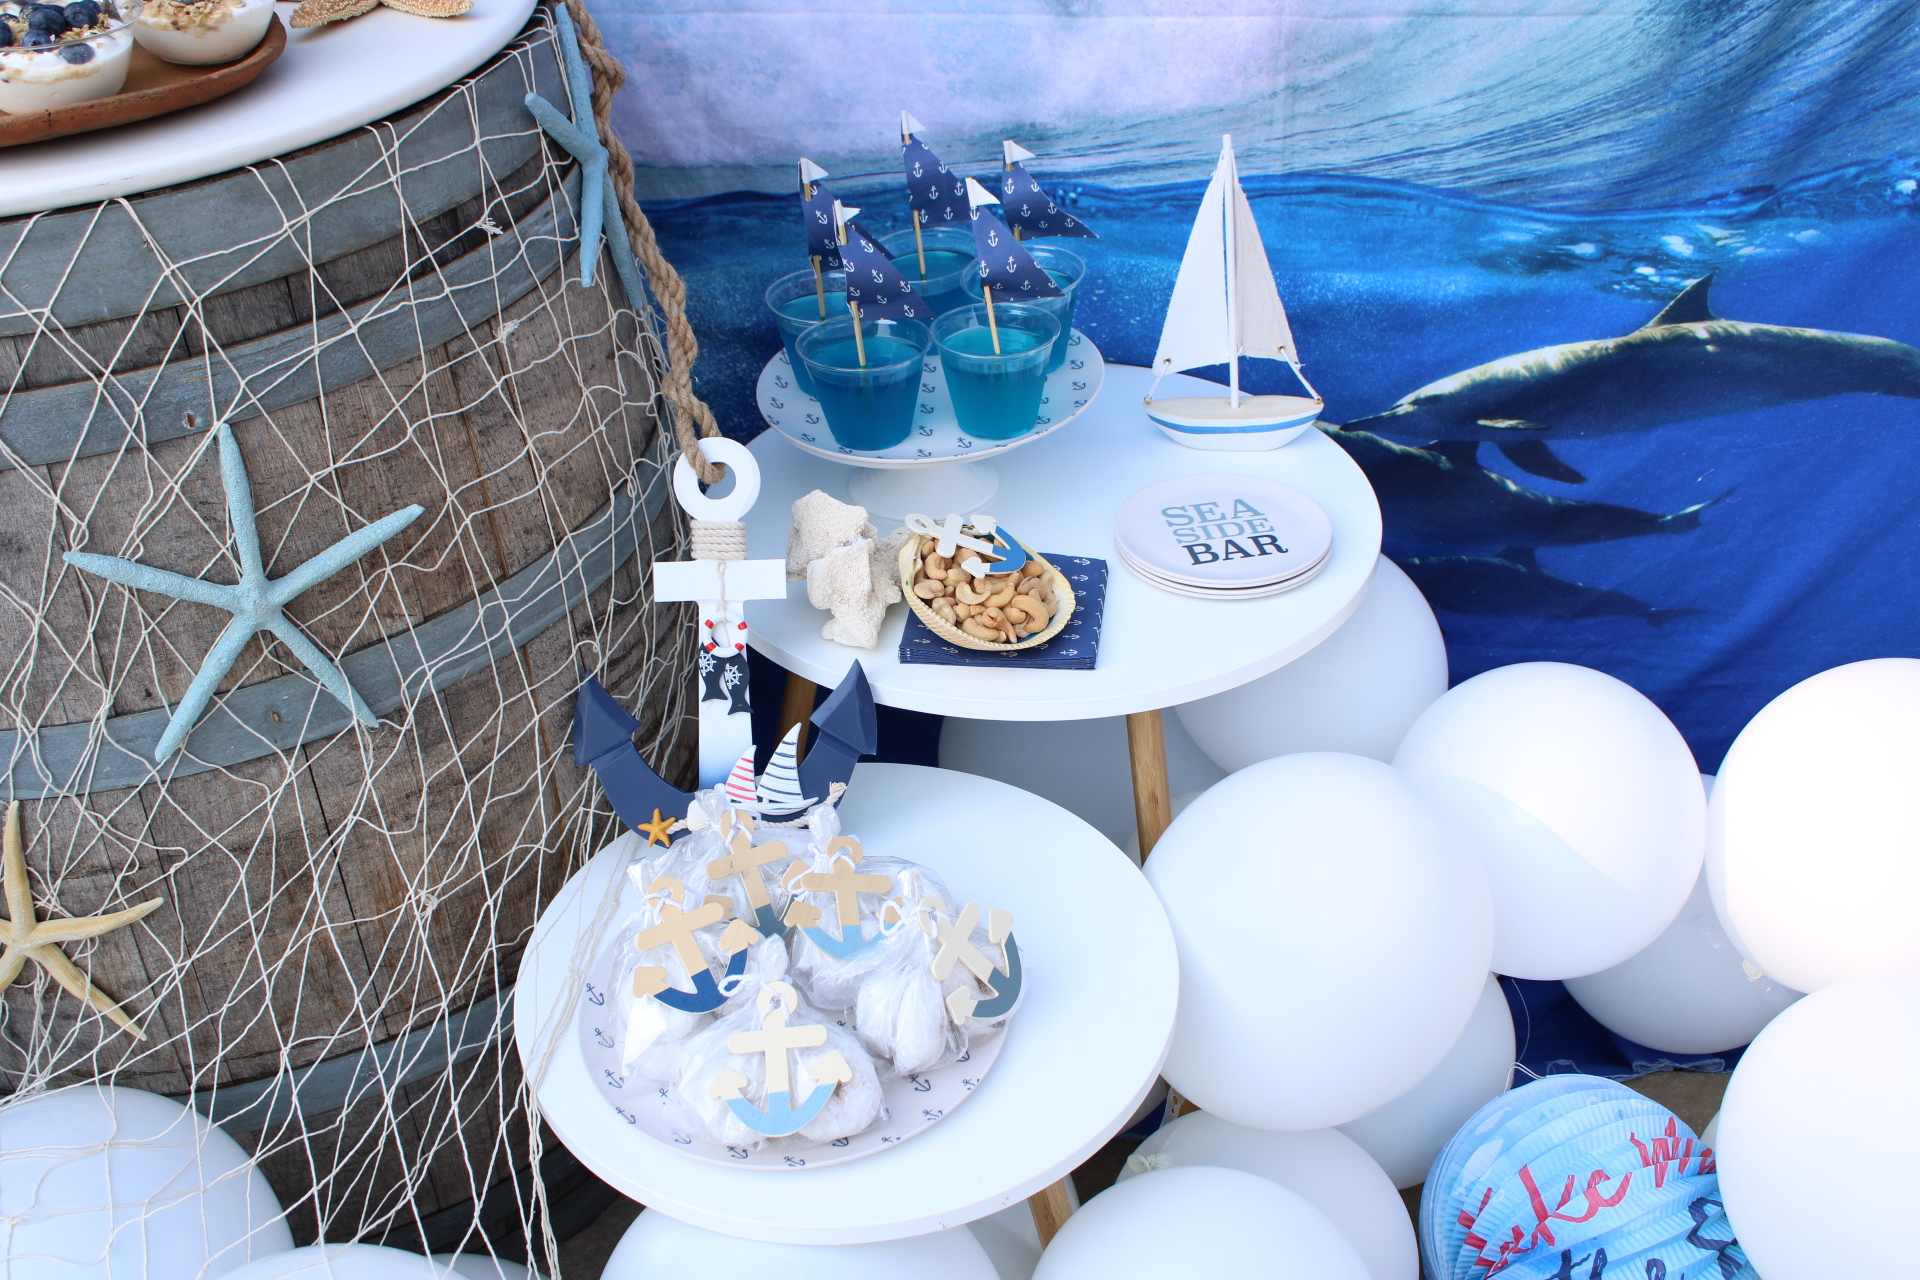 Ahoy its a Boy! Nautical Baby Shower - Party Design, Styling and Decoration  - North Bay California